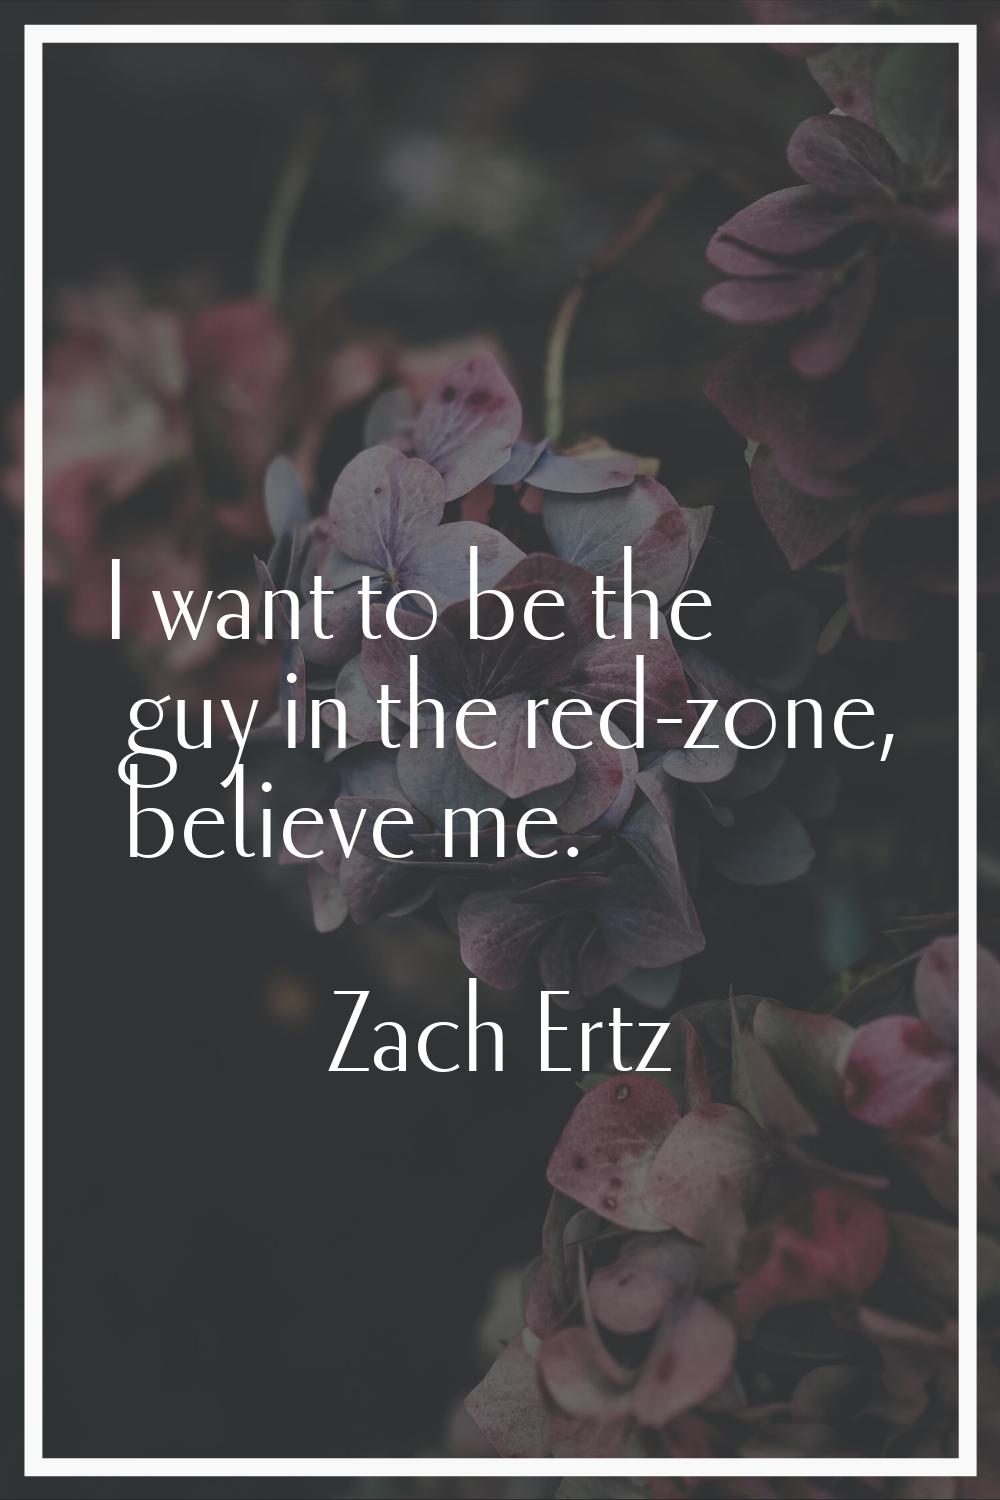 I want to be the guy in the red-zone, believe me.